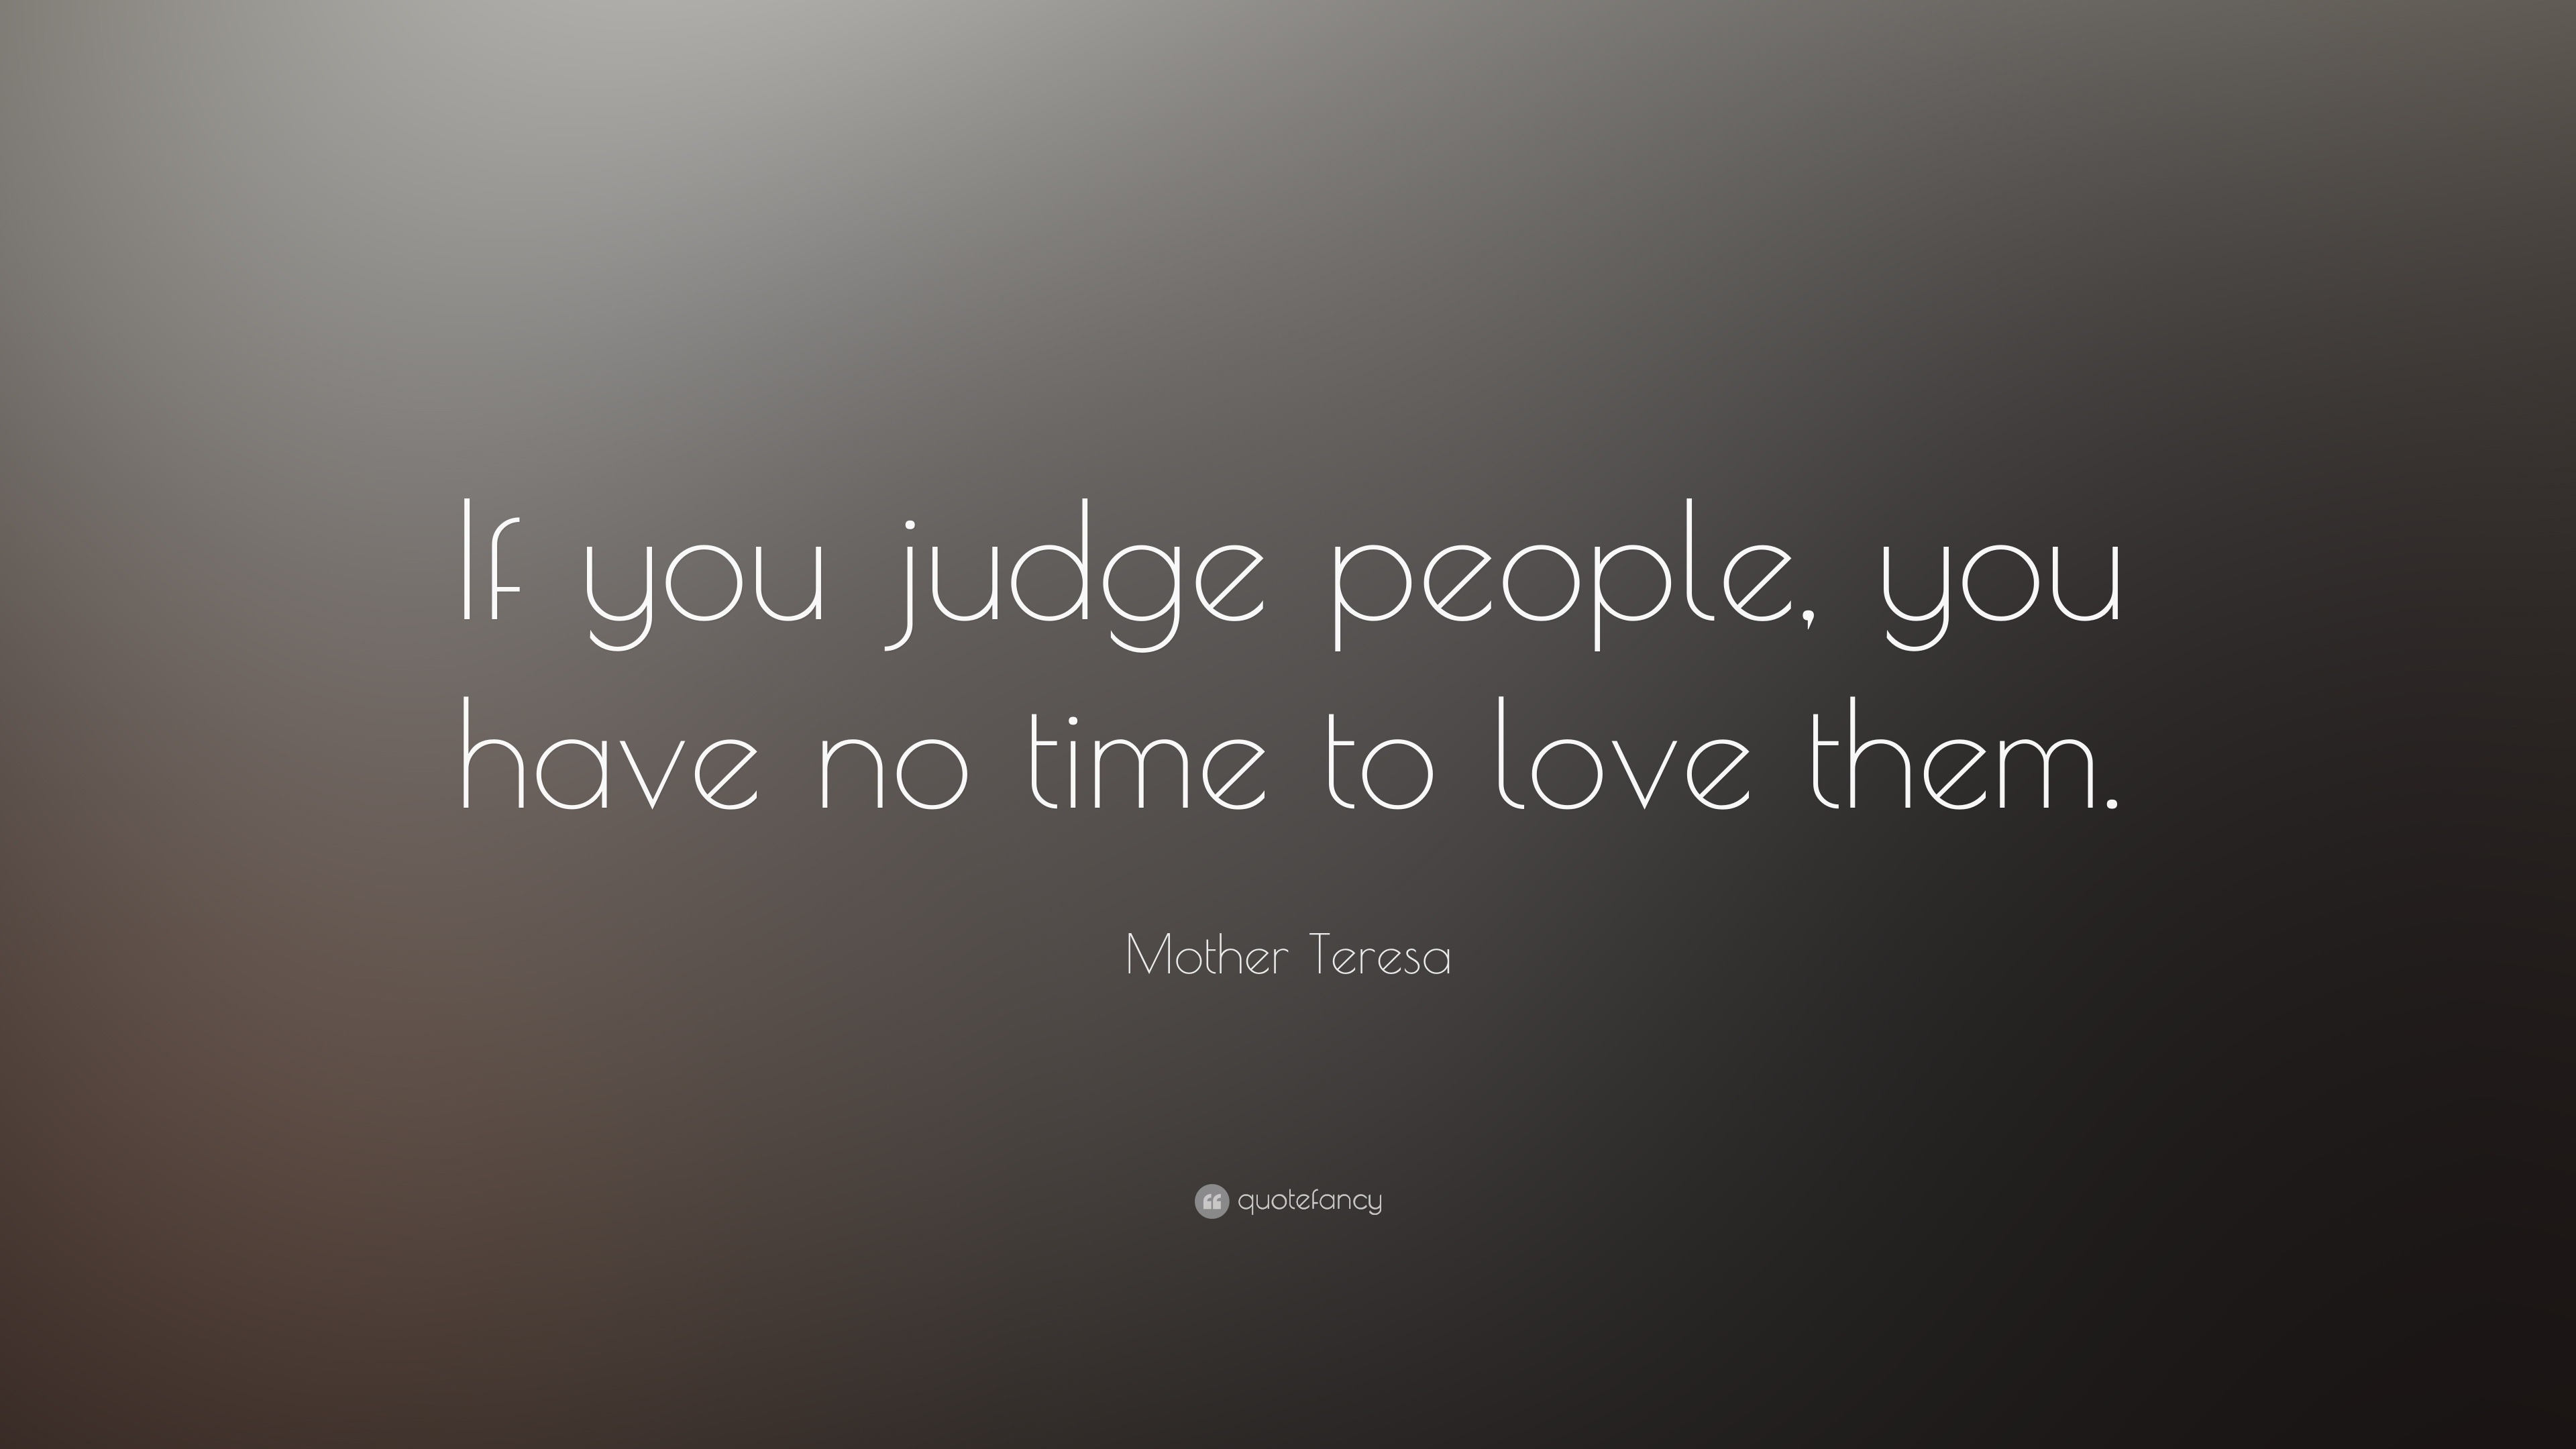 Mother Teresa Quote “If you judge people you have no time to love